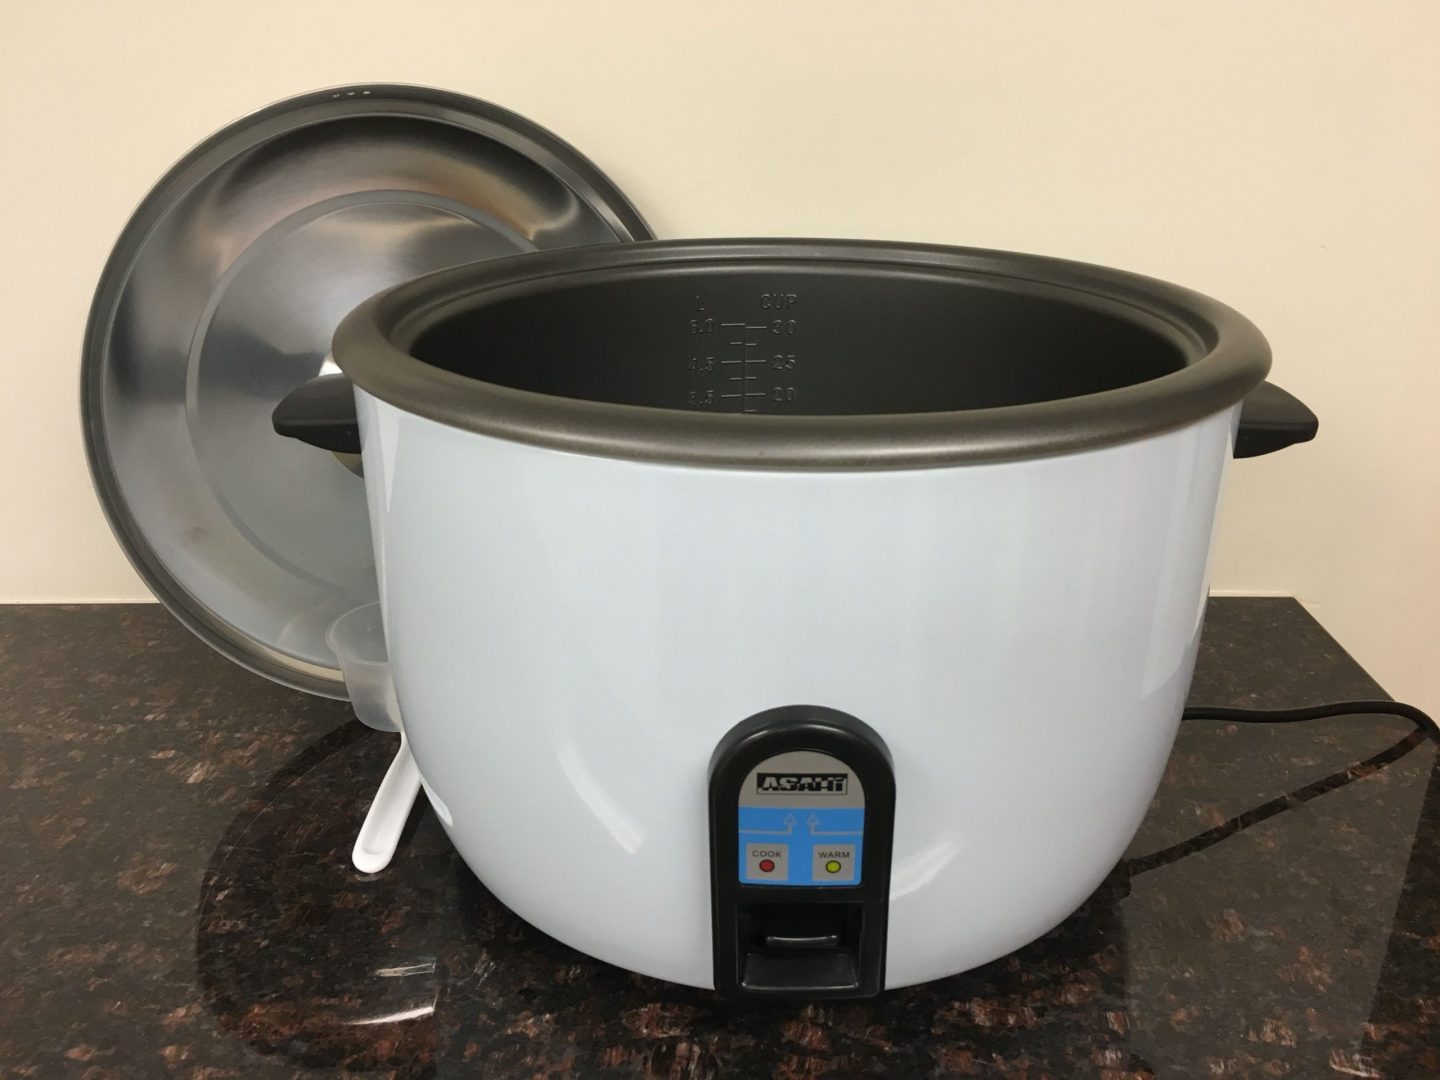 Asahi Electric Rice Cooker CRC-S600 | Channon